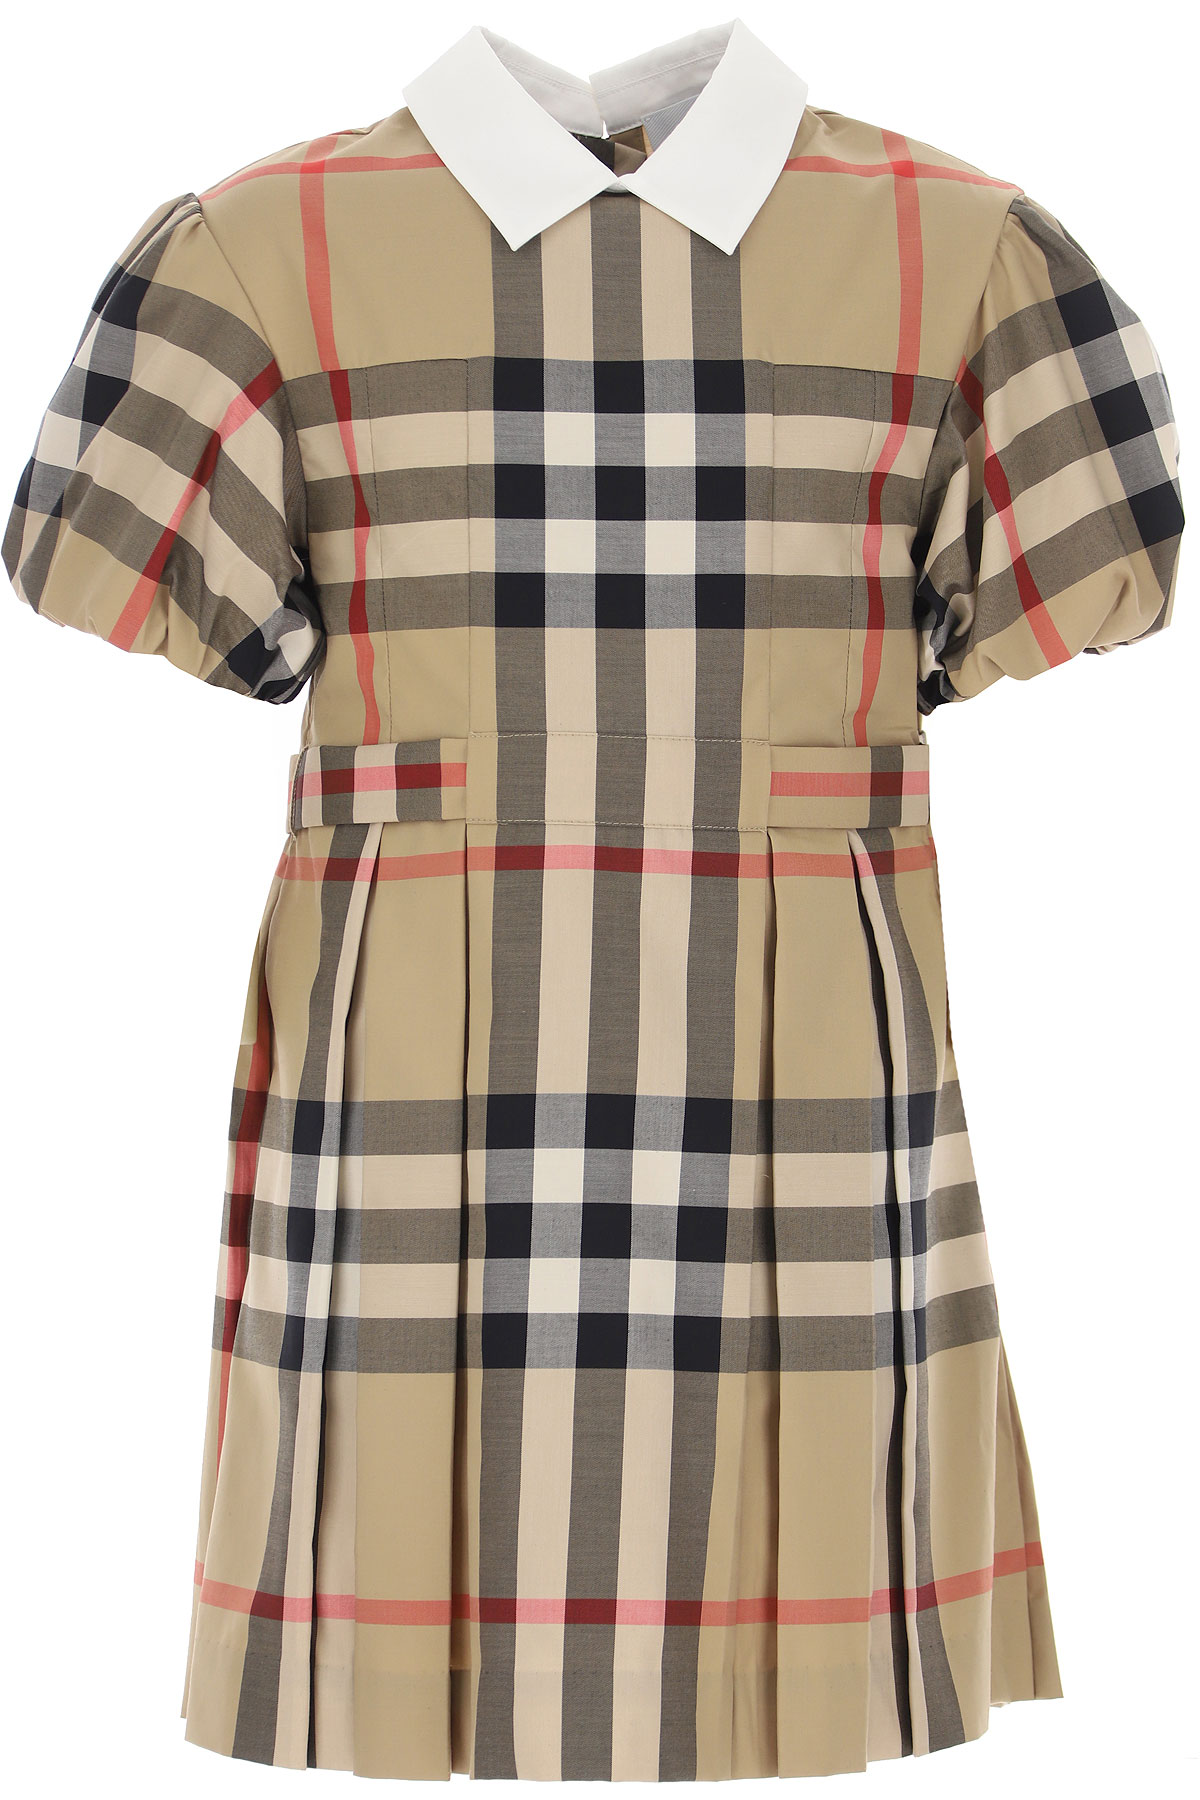 Girls Clothing Burberry, Style code: 8040965-a7028-